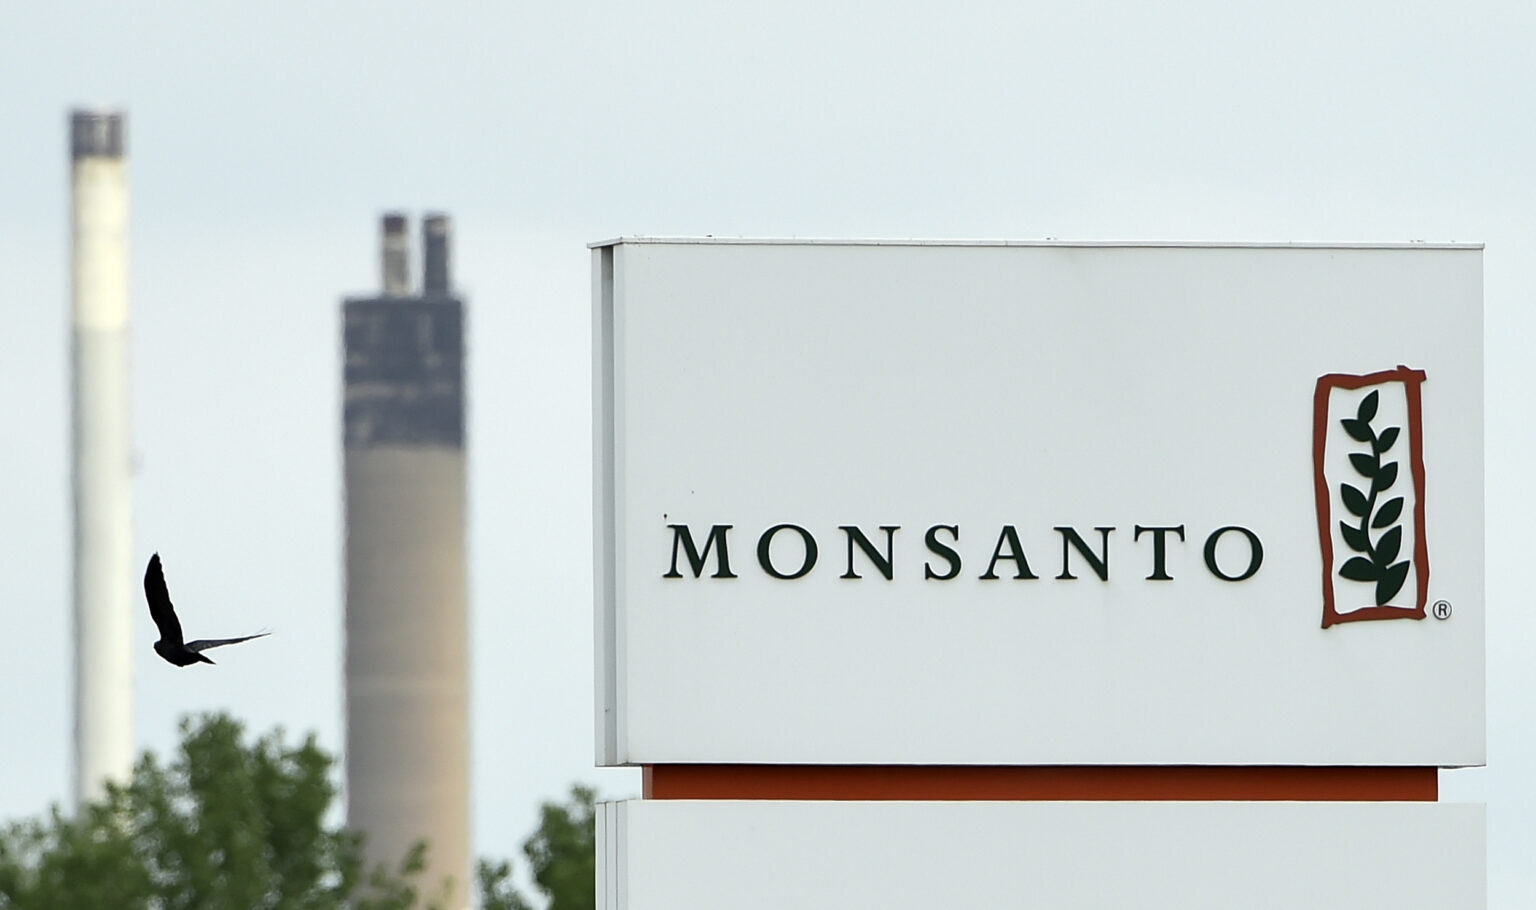 According to activists Greenpeace, Bayer, the company that bought Monsanto in South Africa is still distributing the weed killer, glyphosate which may cause cancer. Photo/NBC